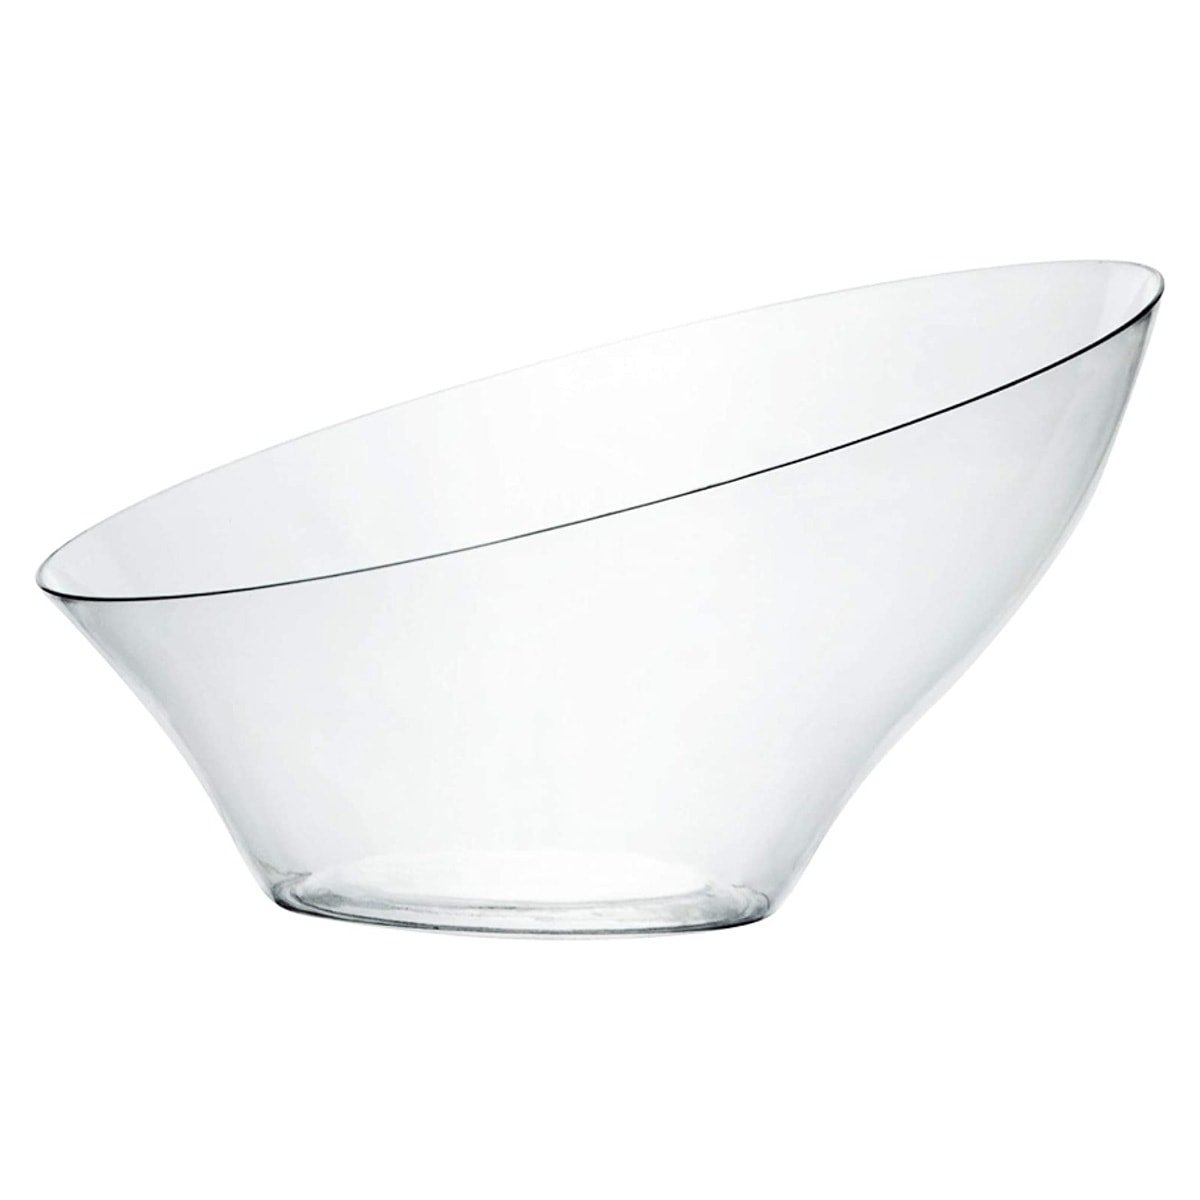 A clear glass serving bowl with an angled rim.